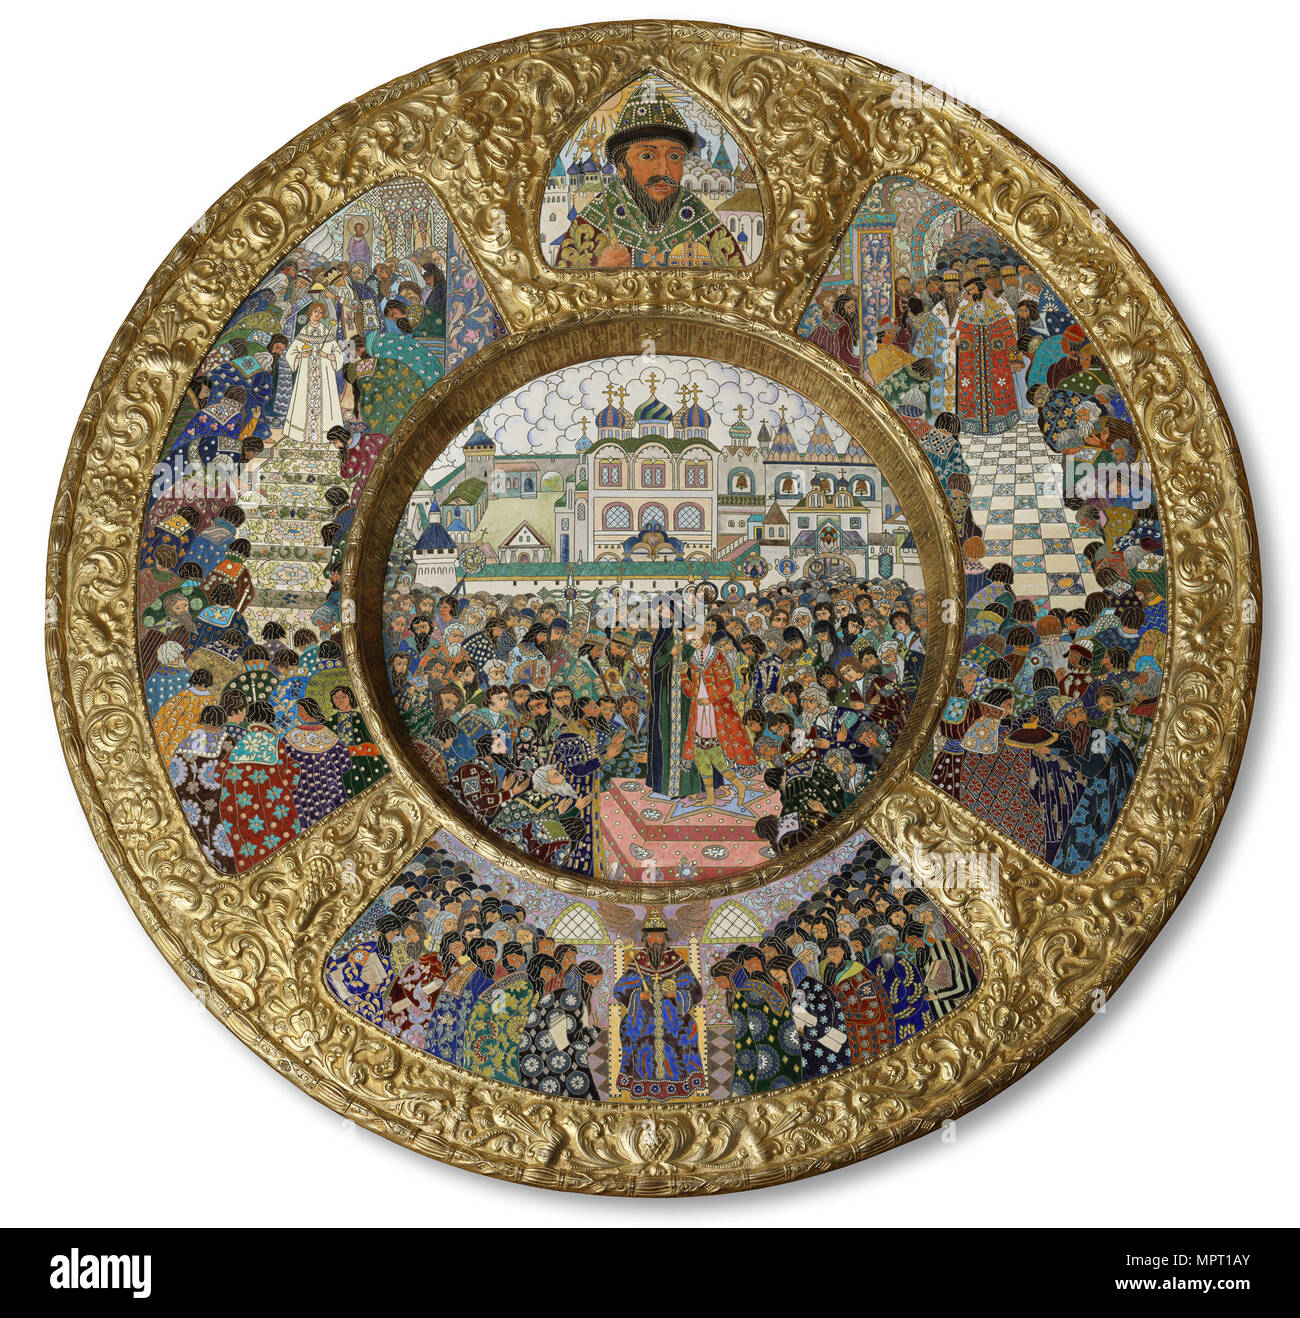 Dish with scenes the Election of Michail Romanov to the Tsar on 14 March 1613, 1913. Stock Photo